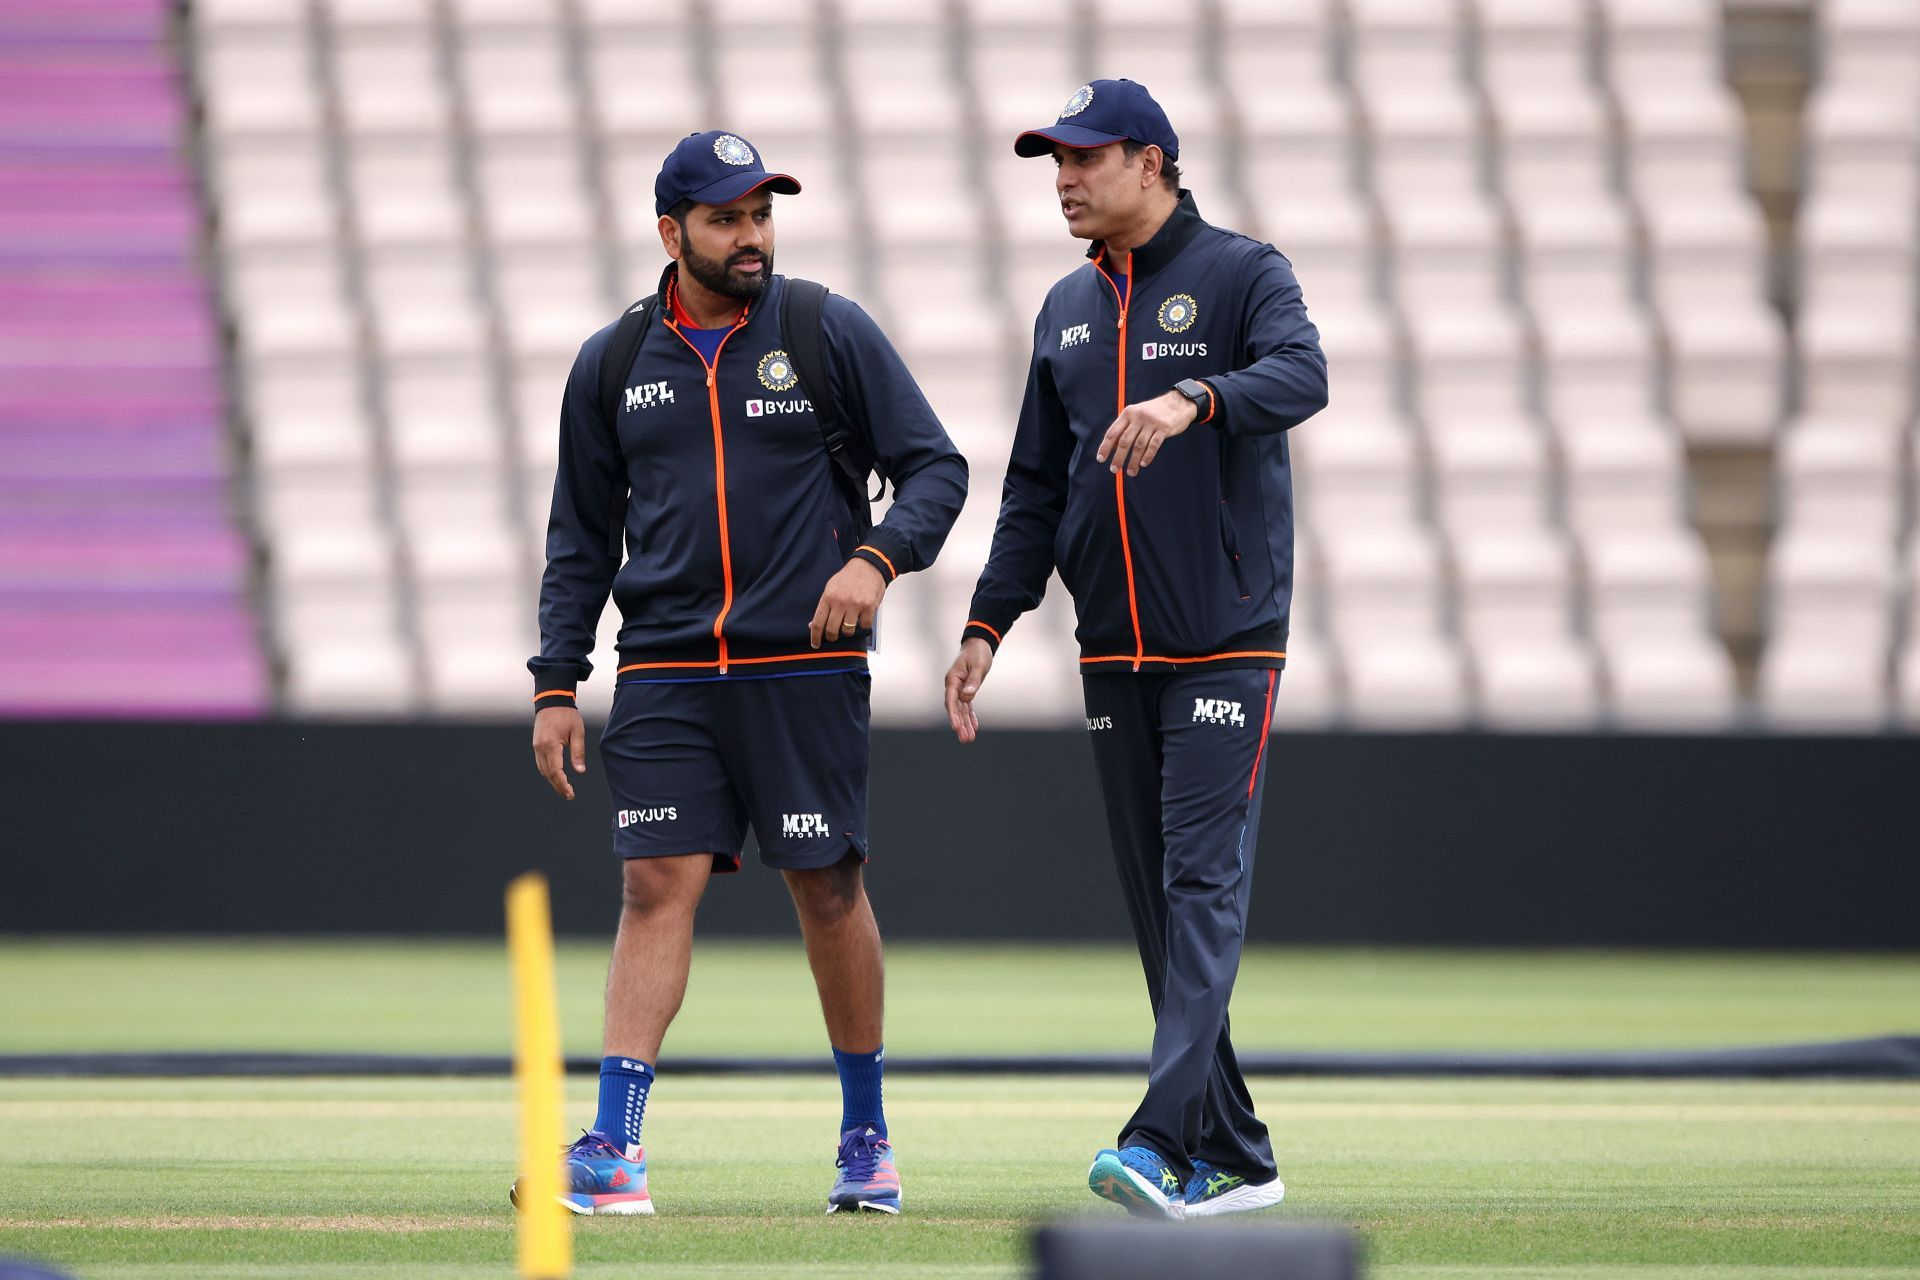 Captain Rohit Sharma (L) with coach VVS Laxman at the training nets in Southampton (Image: Getty)